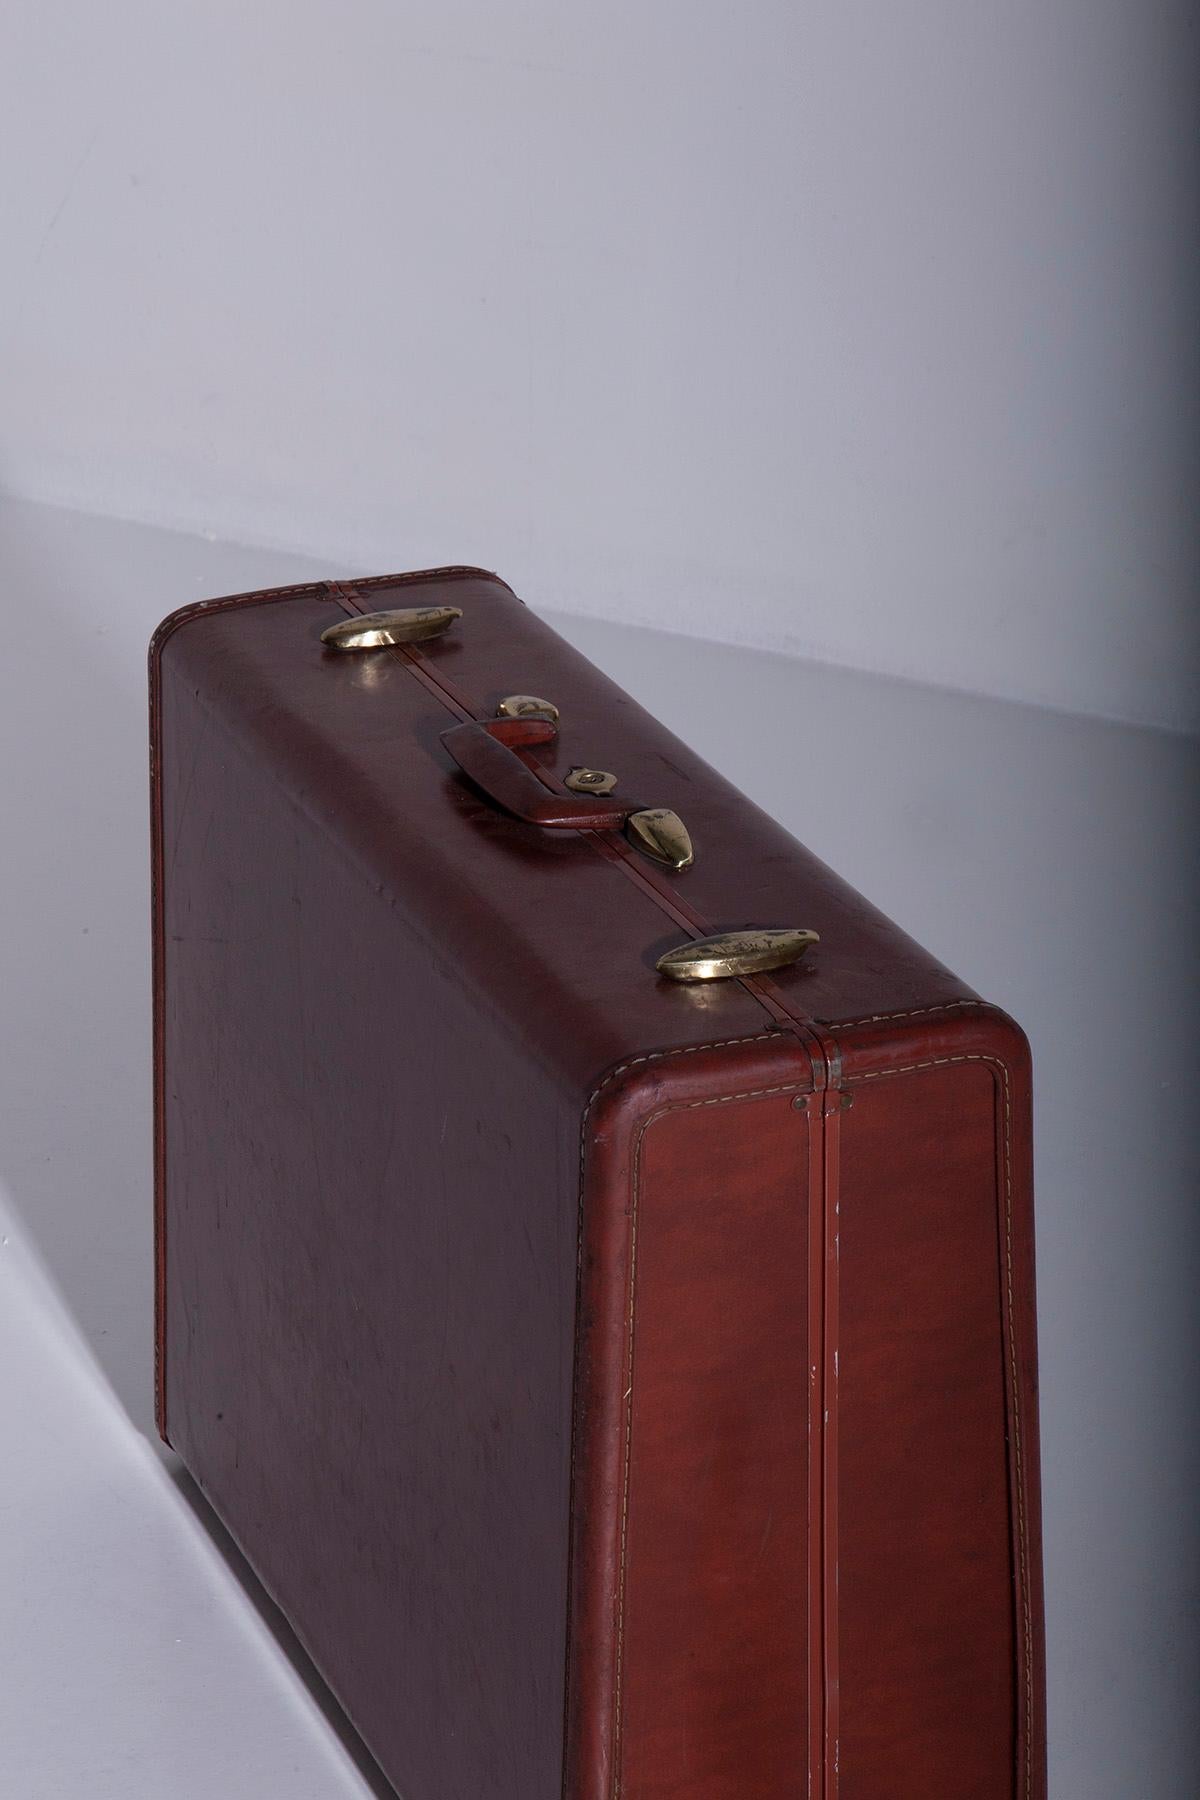 Samsonite Vintage Suitcases in leather For Sale 1